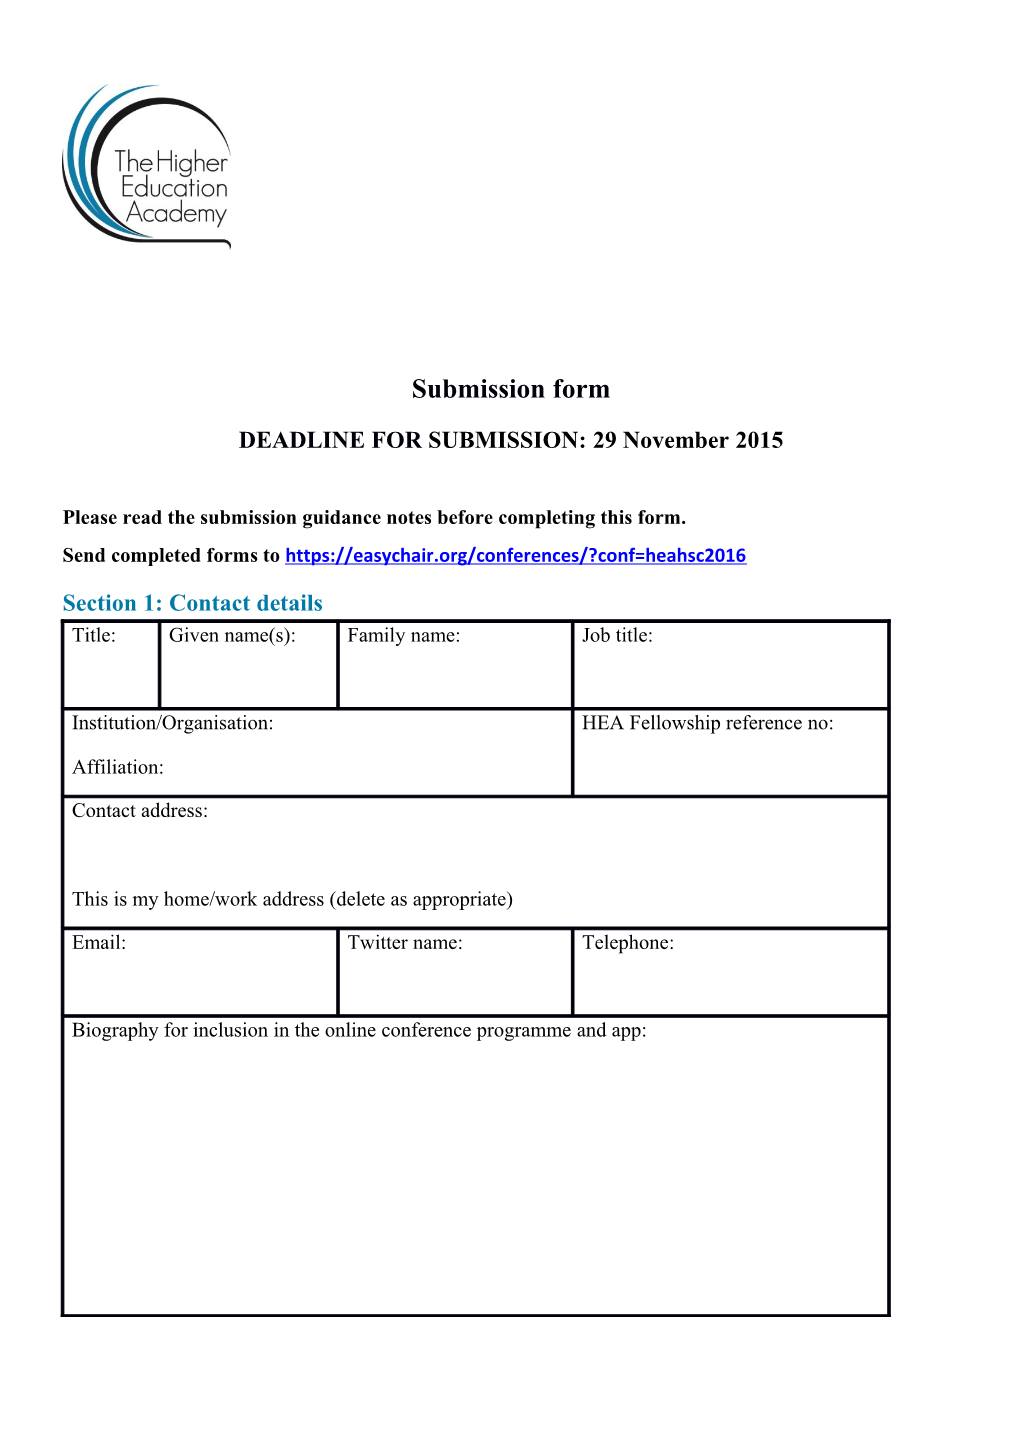 Please Read the Submission Guidance Notes Before Completing This Form